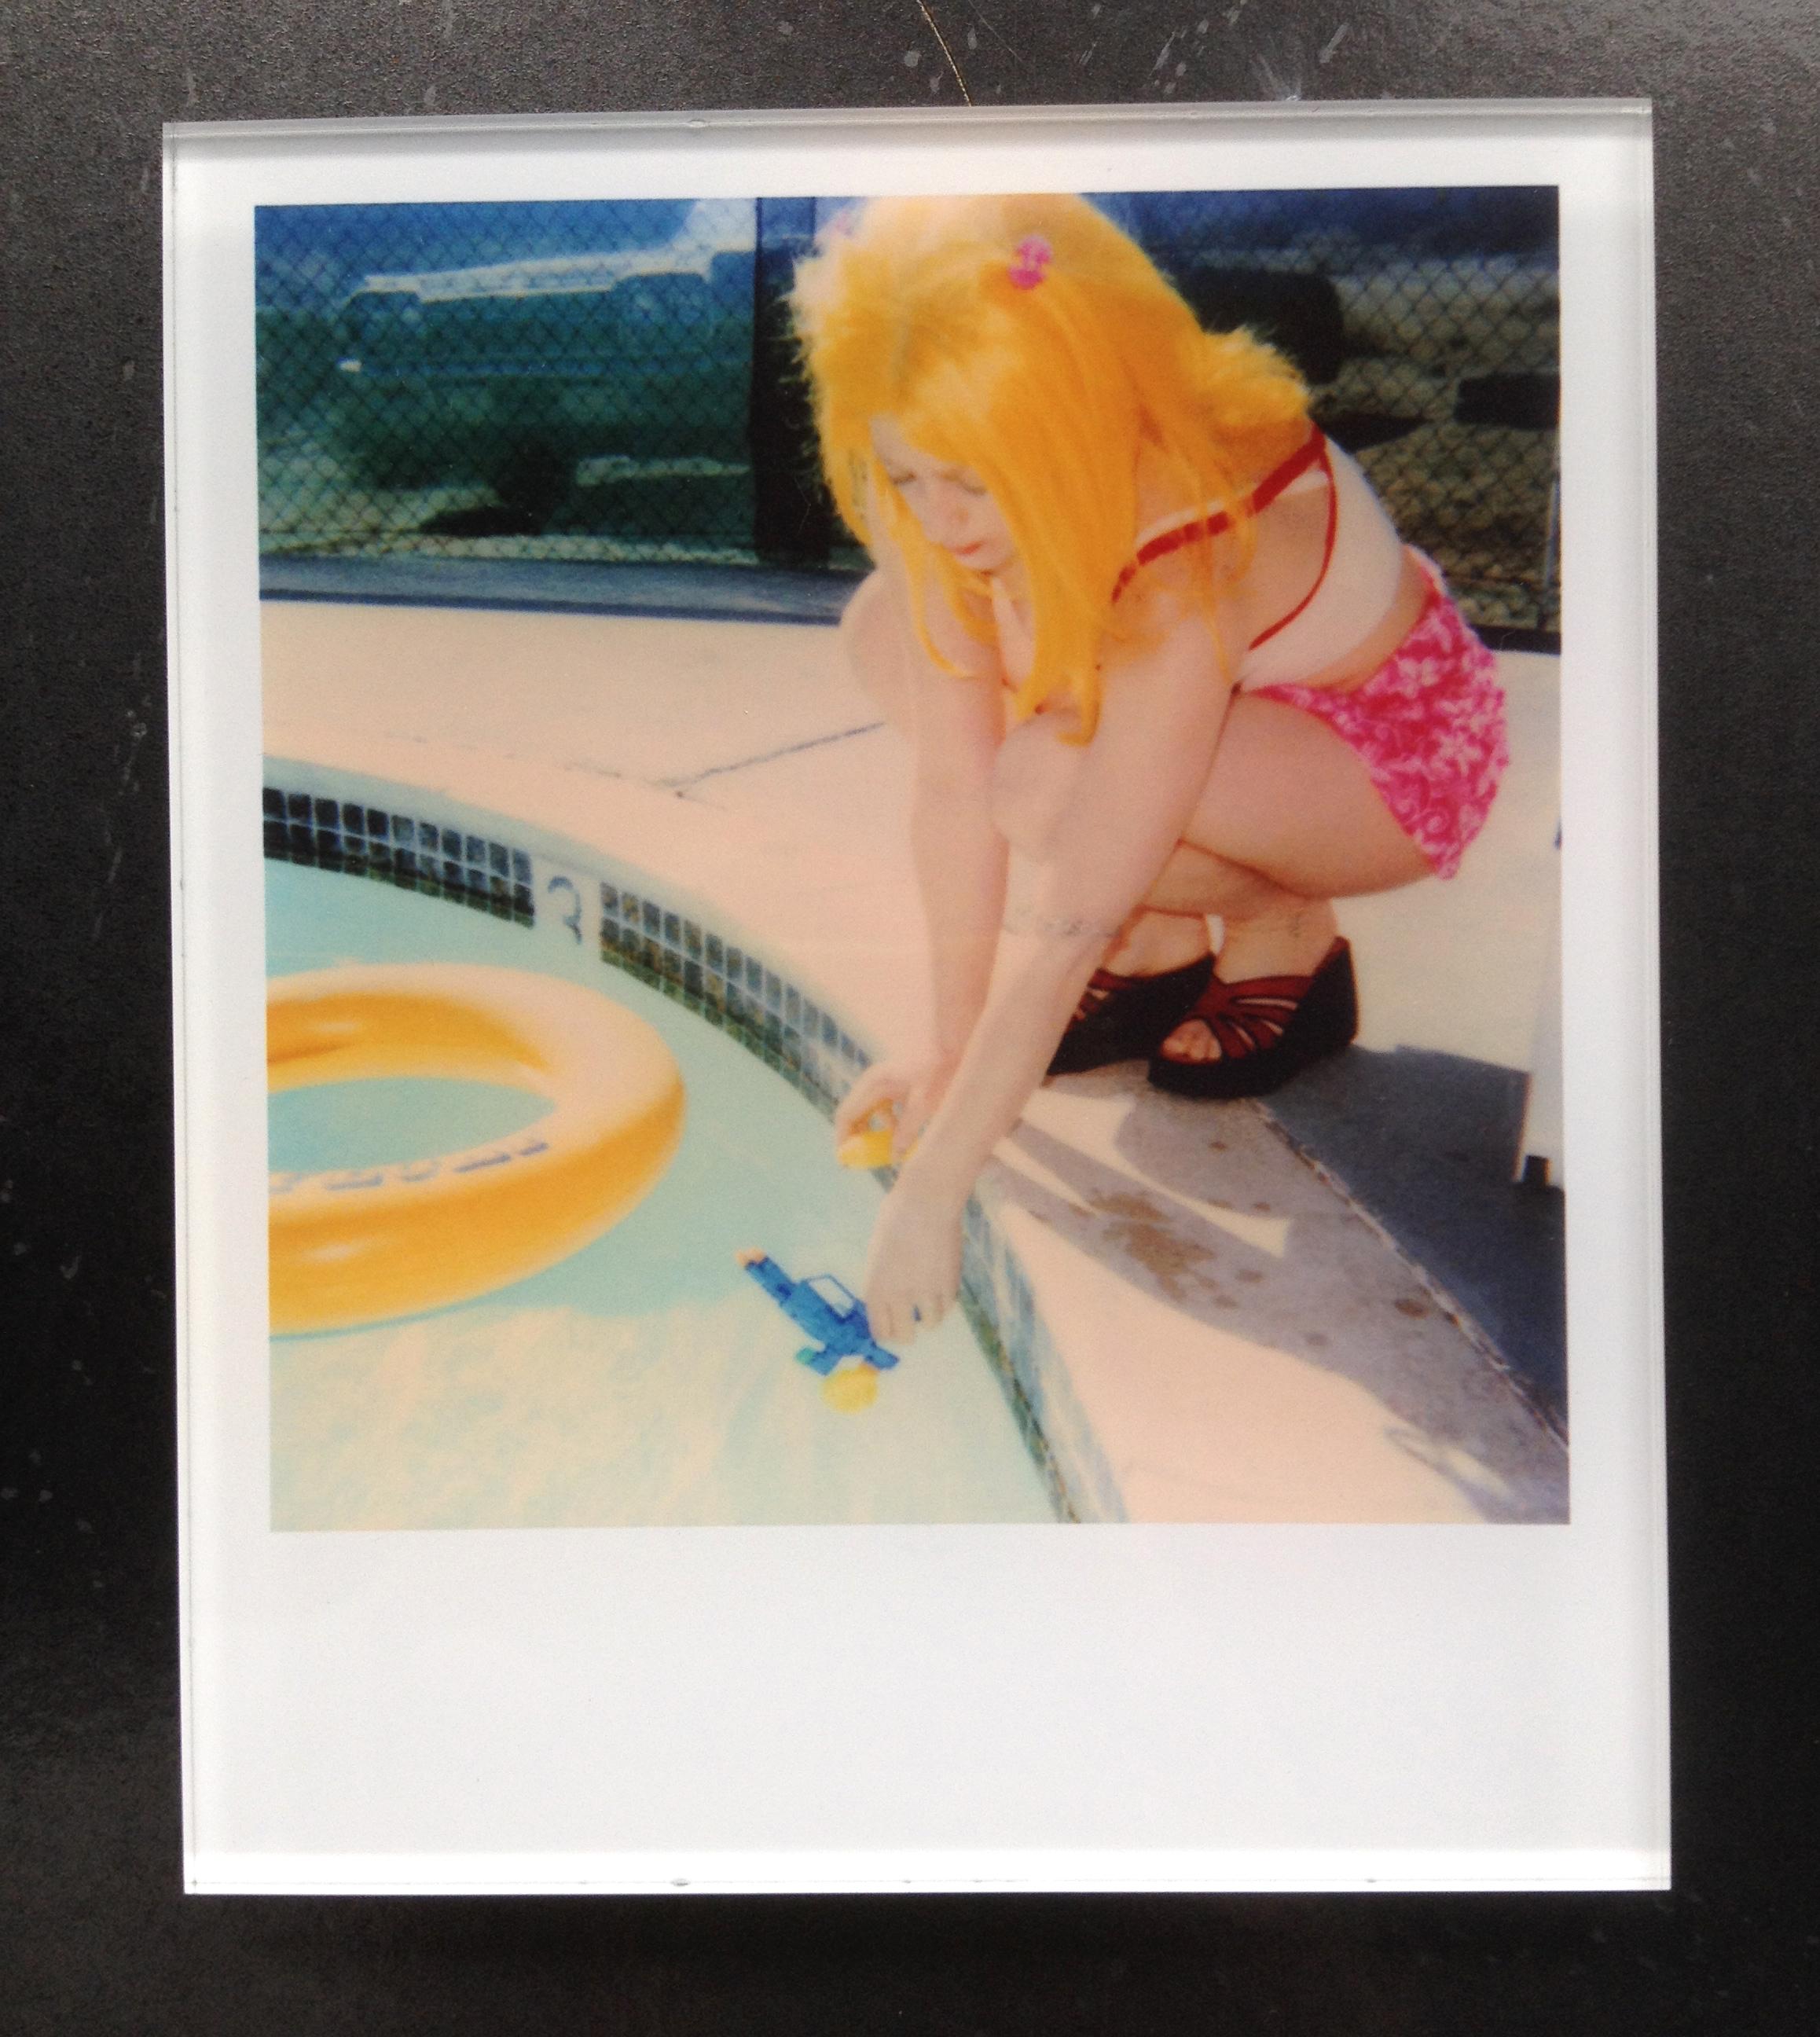 Stefanie Schneider's Minis

'Max by the Pool' (29 Palms, CA), 1999
signed and signature brand on verso
Lambda Color Photographs based on the original Polaroid. 

Polaroid sized open Editions 1999-2013
10.7 x 8.8cm (Image 7.9x7.7cm)
mounted: